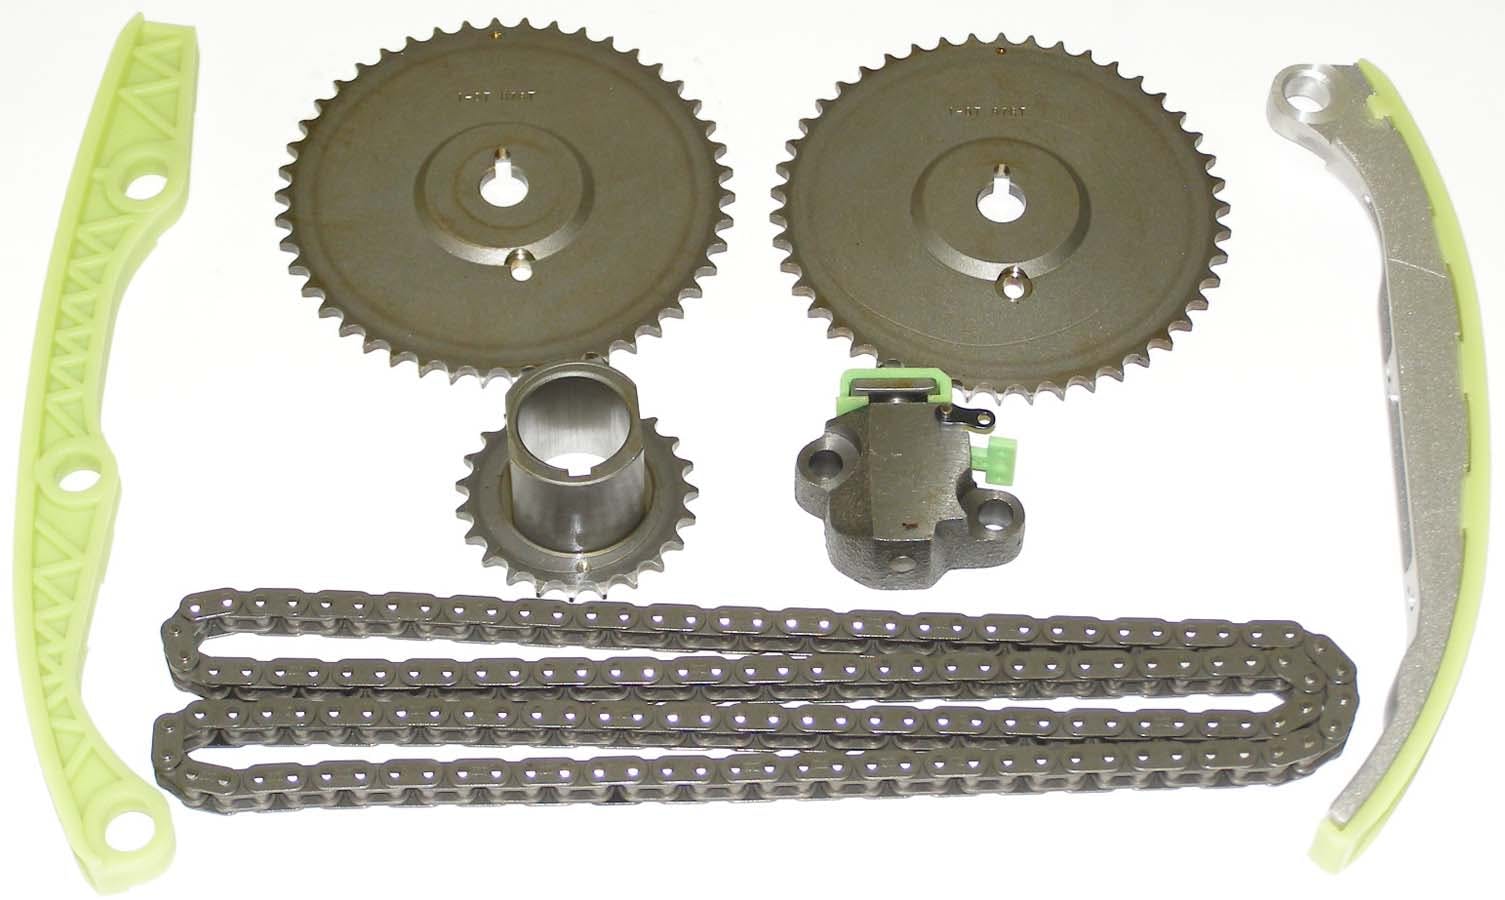 Cloyes 9-4204S Engine Timing Chain Kit Engine Timing Chain Kit